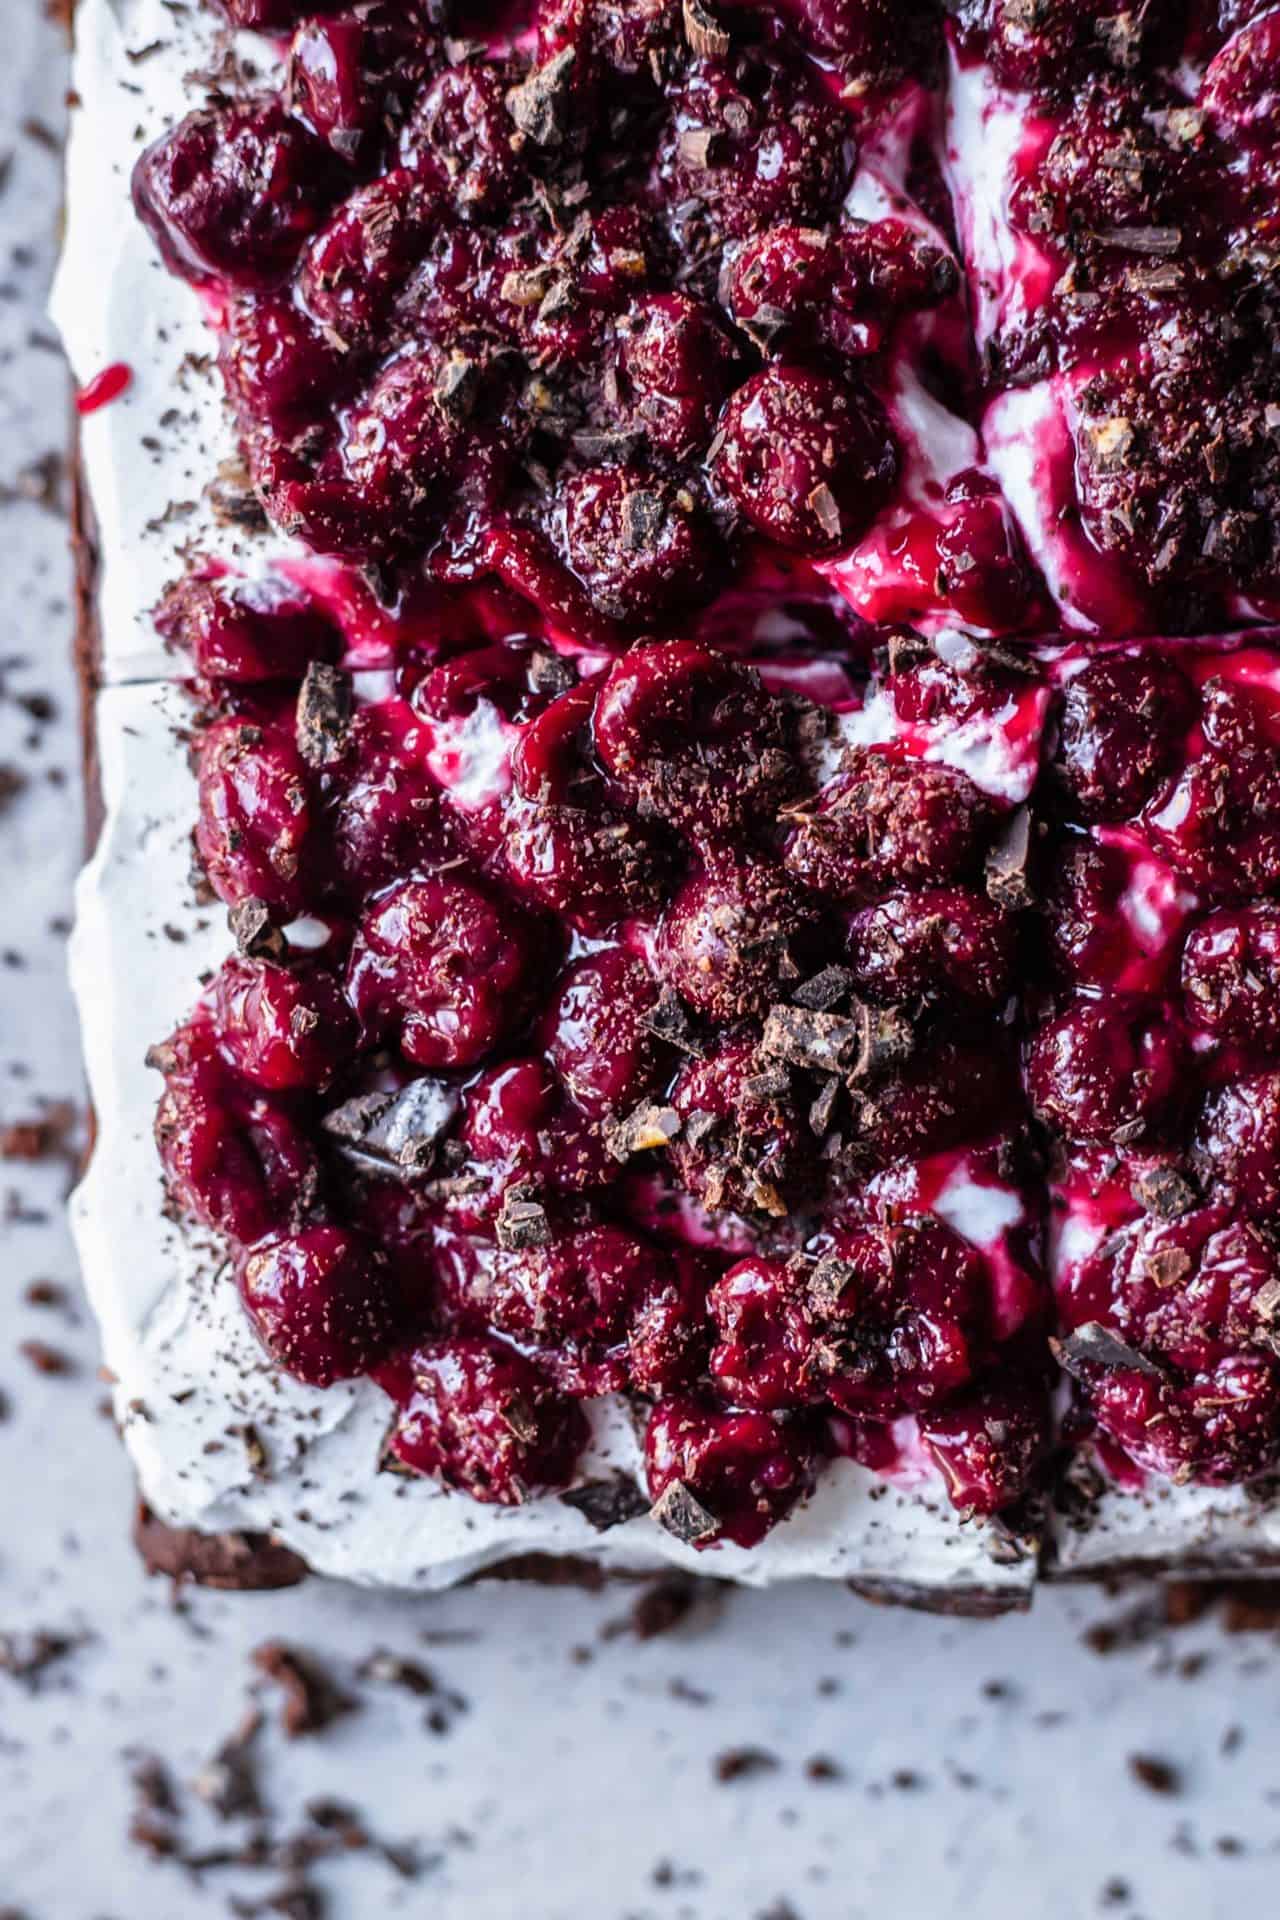 These Gluten-Free Black Forest Brownies are fudgy, indulging, super chocolaty, rich, and very easy to make. They are the lazy version of Black Forest Cake